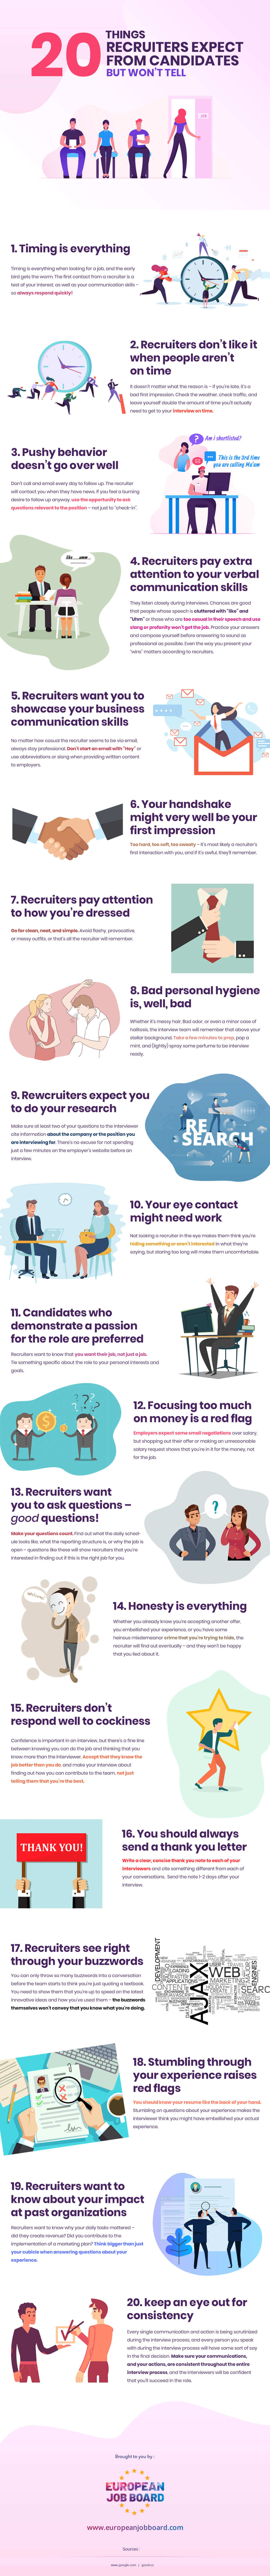 Top 20 Things Recruiters Want From the Candidates